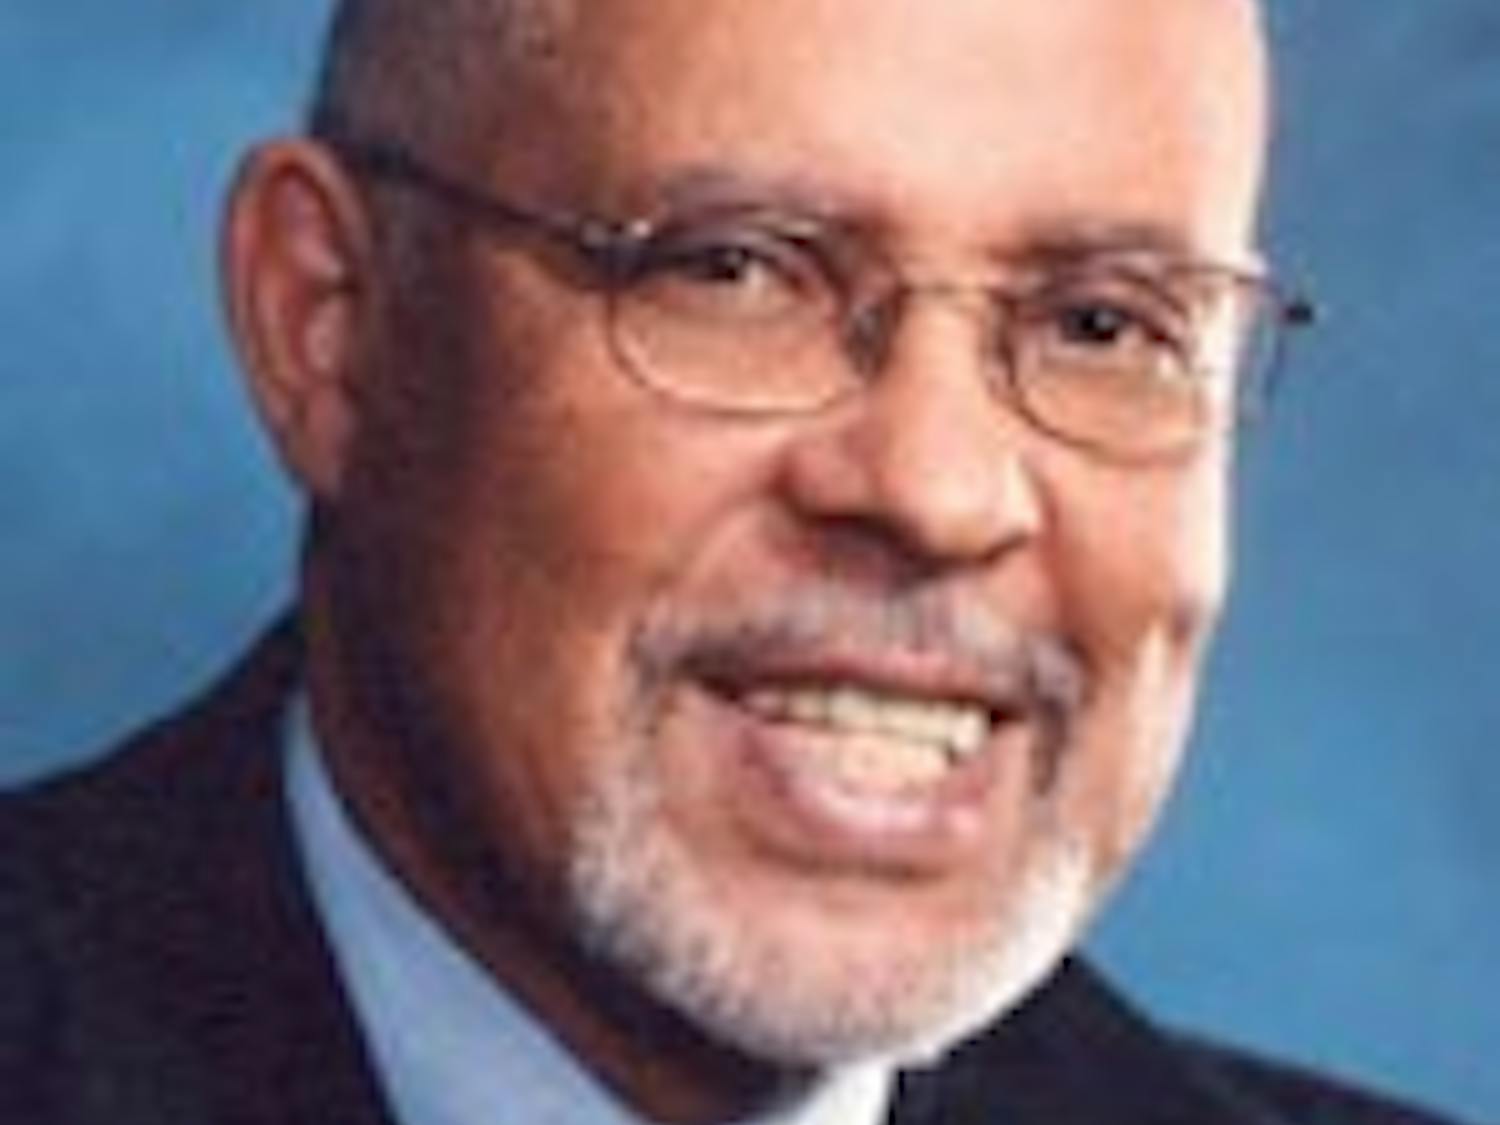 James Joseph served as ambassador to South Africa from 1996-99.